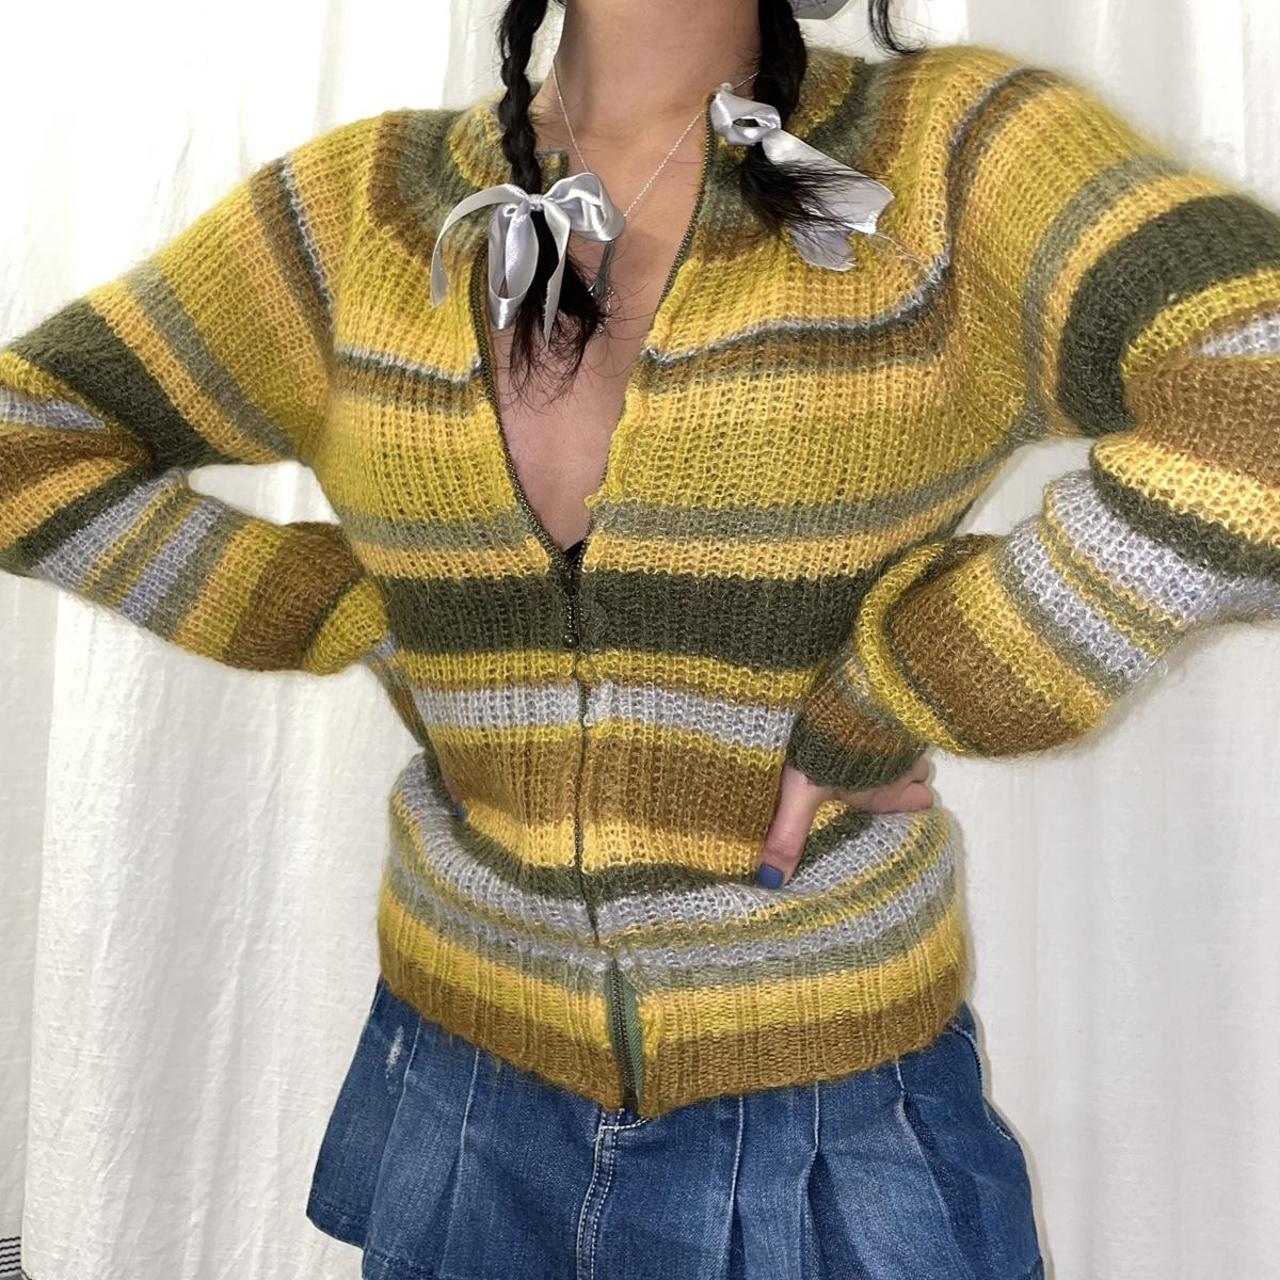 Hysteric Glamour Mohair Knit Sweater ੈ✩‧₊˚ , ✰ 50%...